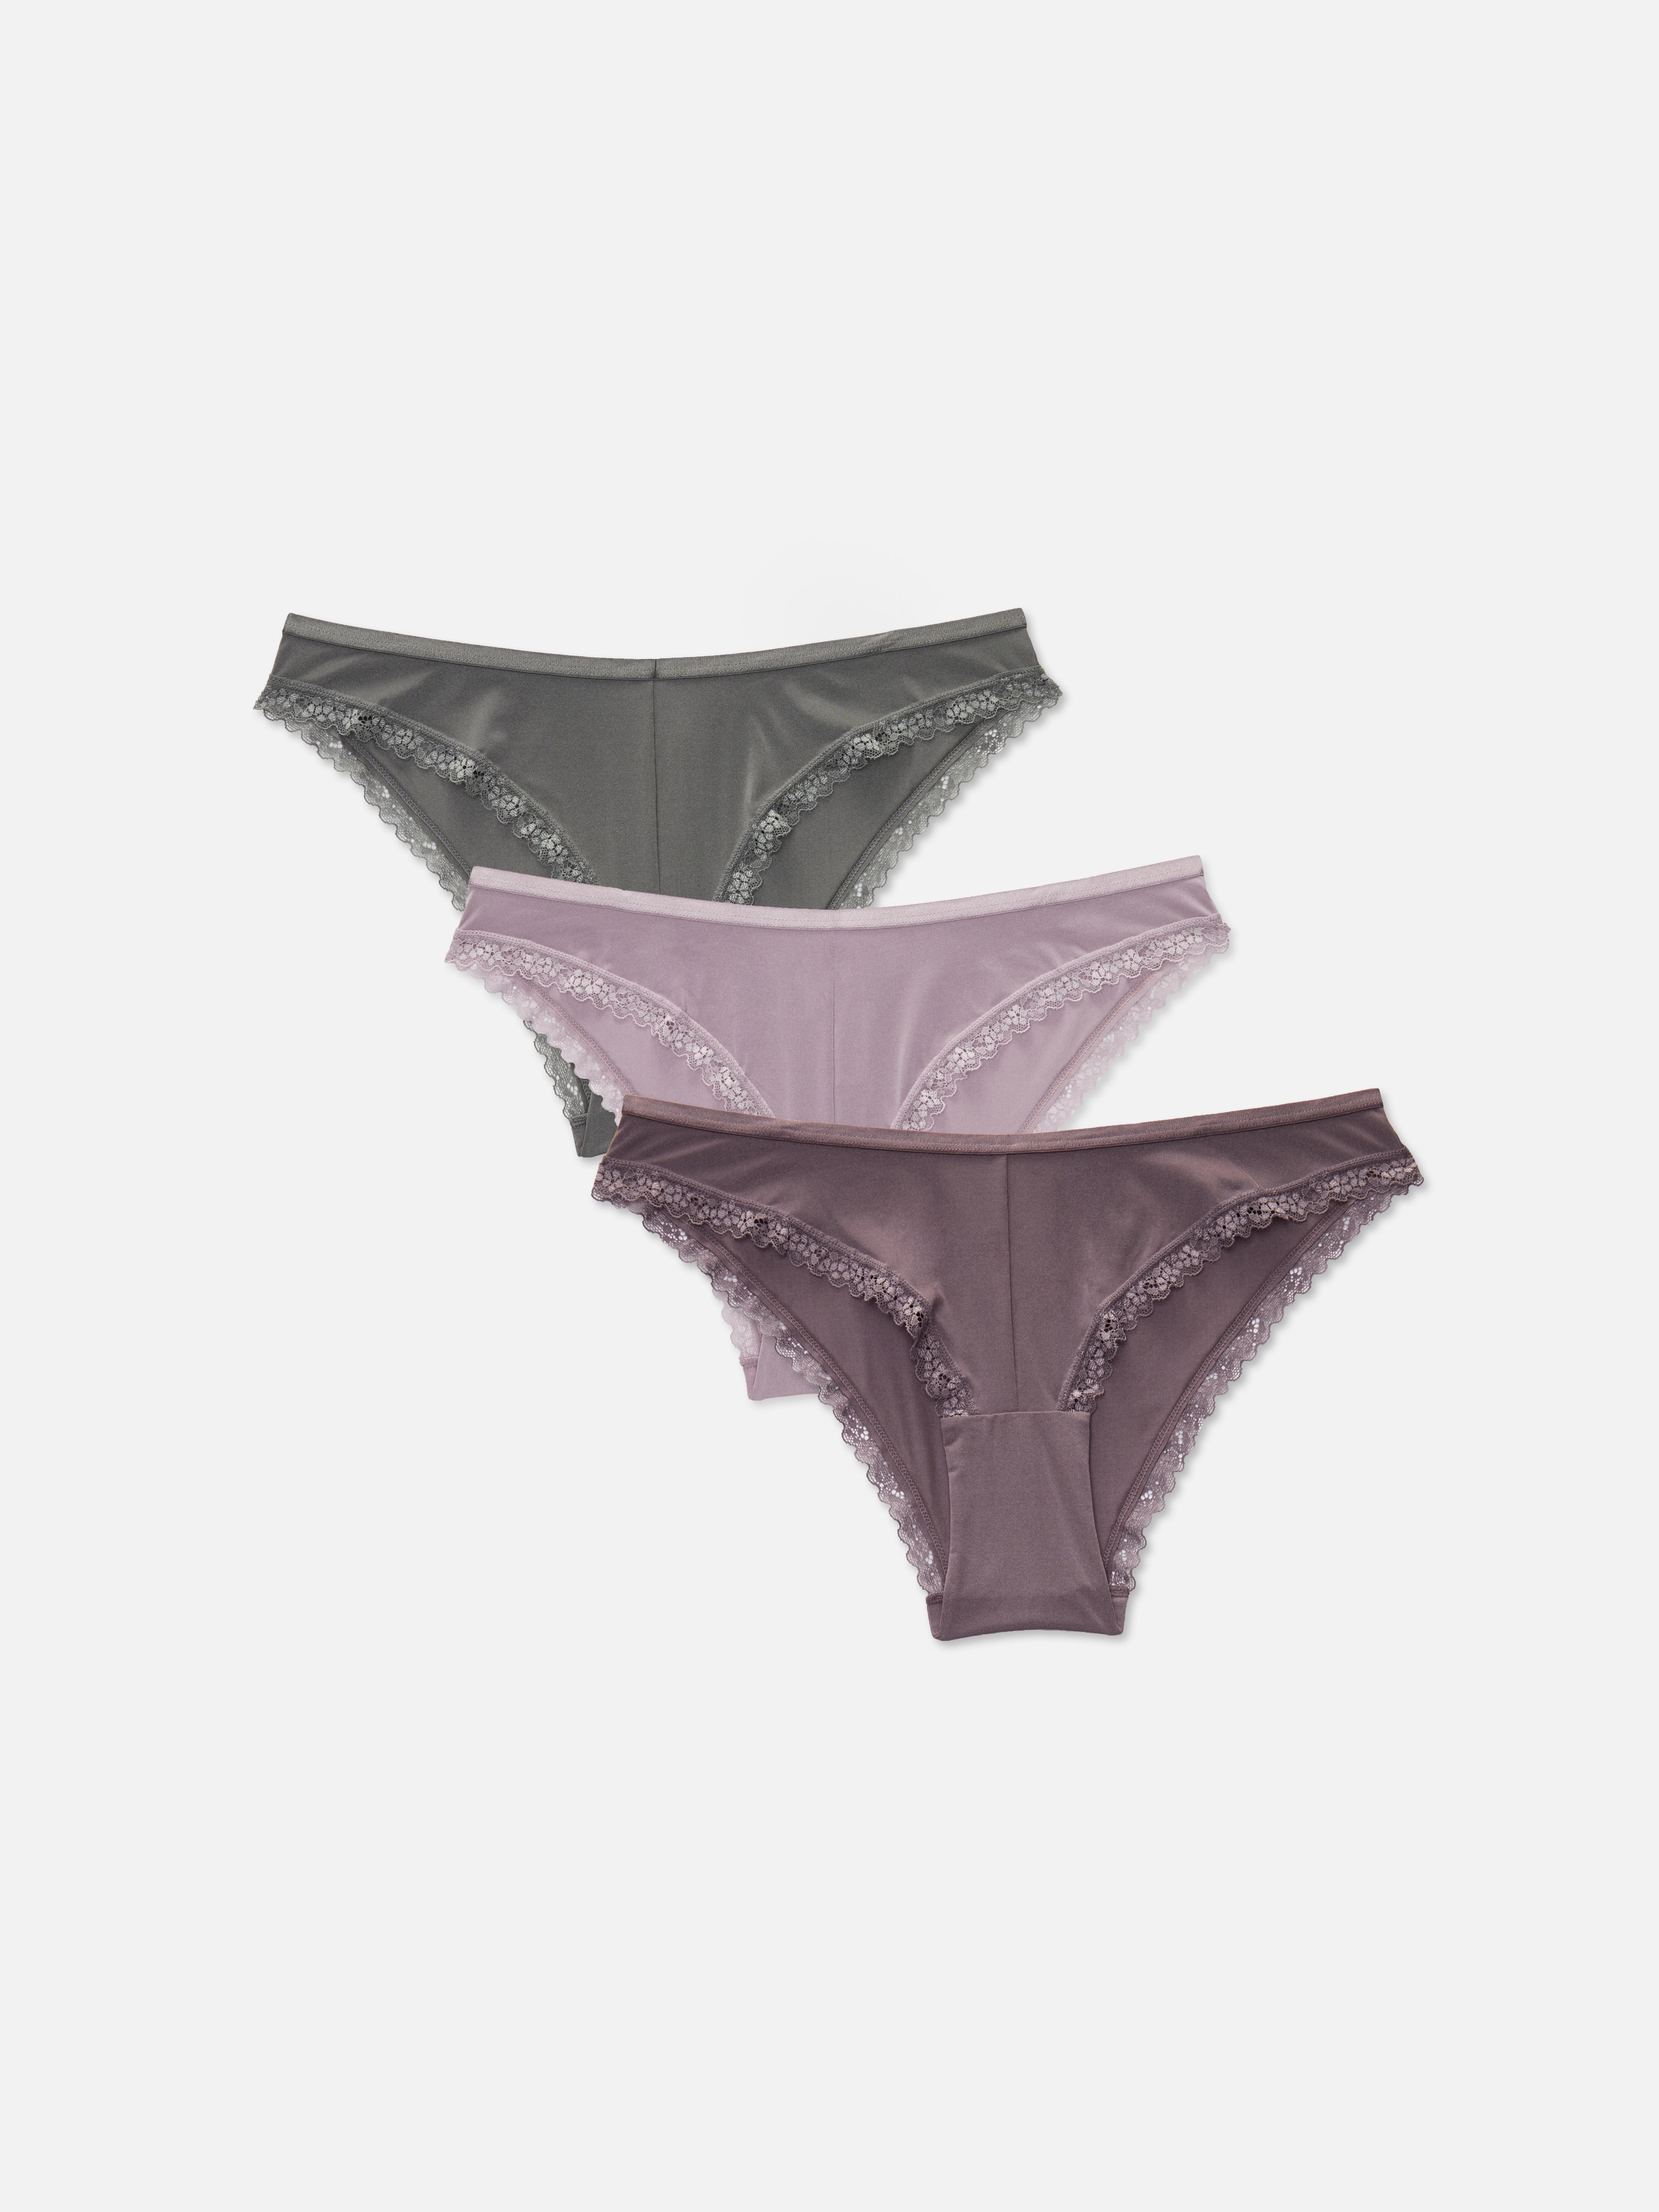 Primark - P-p-pick up a pant!! Primark have frilly thongs, lace frenchies  and heart smothered cotton briefs in store now, all from £1 to £2.50!